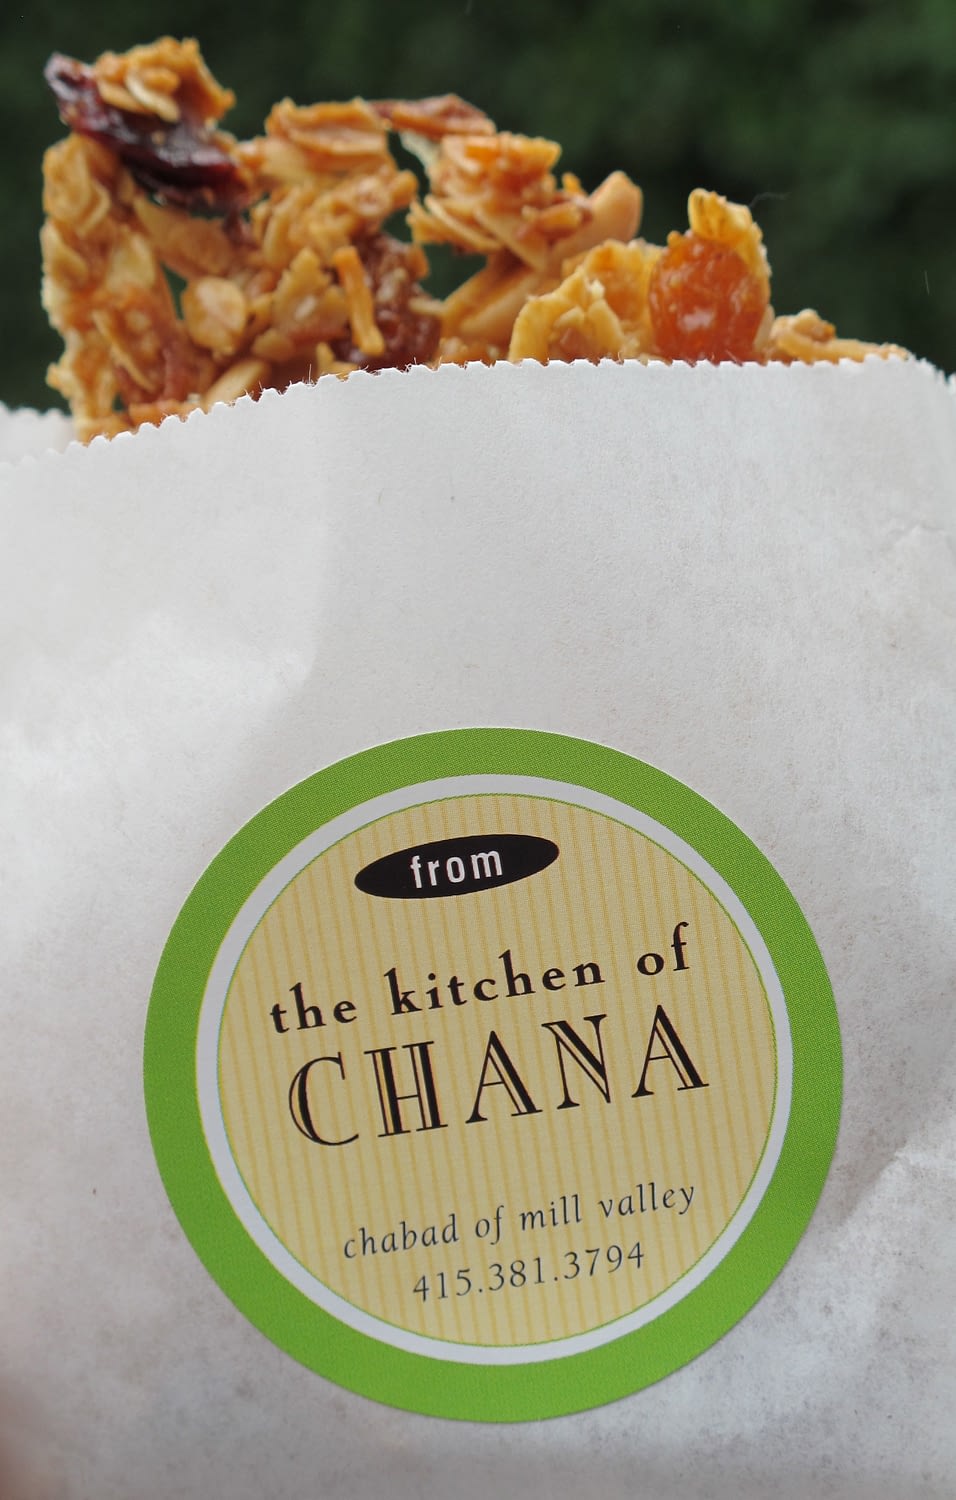 A simple packet and a simple stylish label! A sweet wholesome snack for the hike!